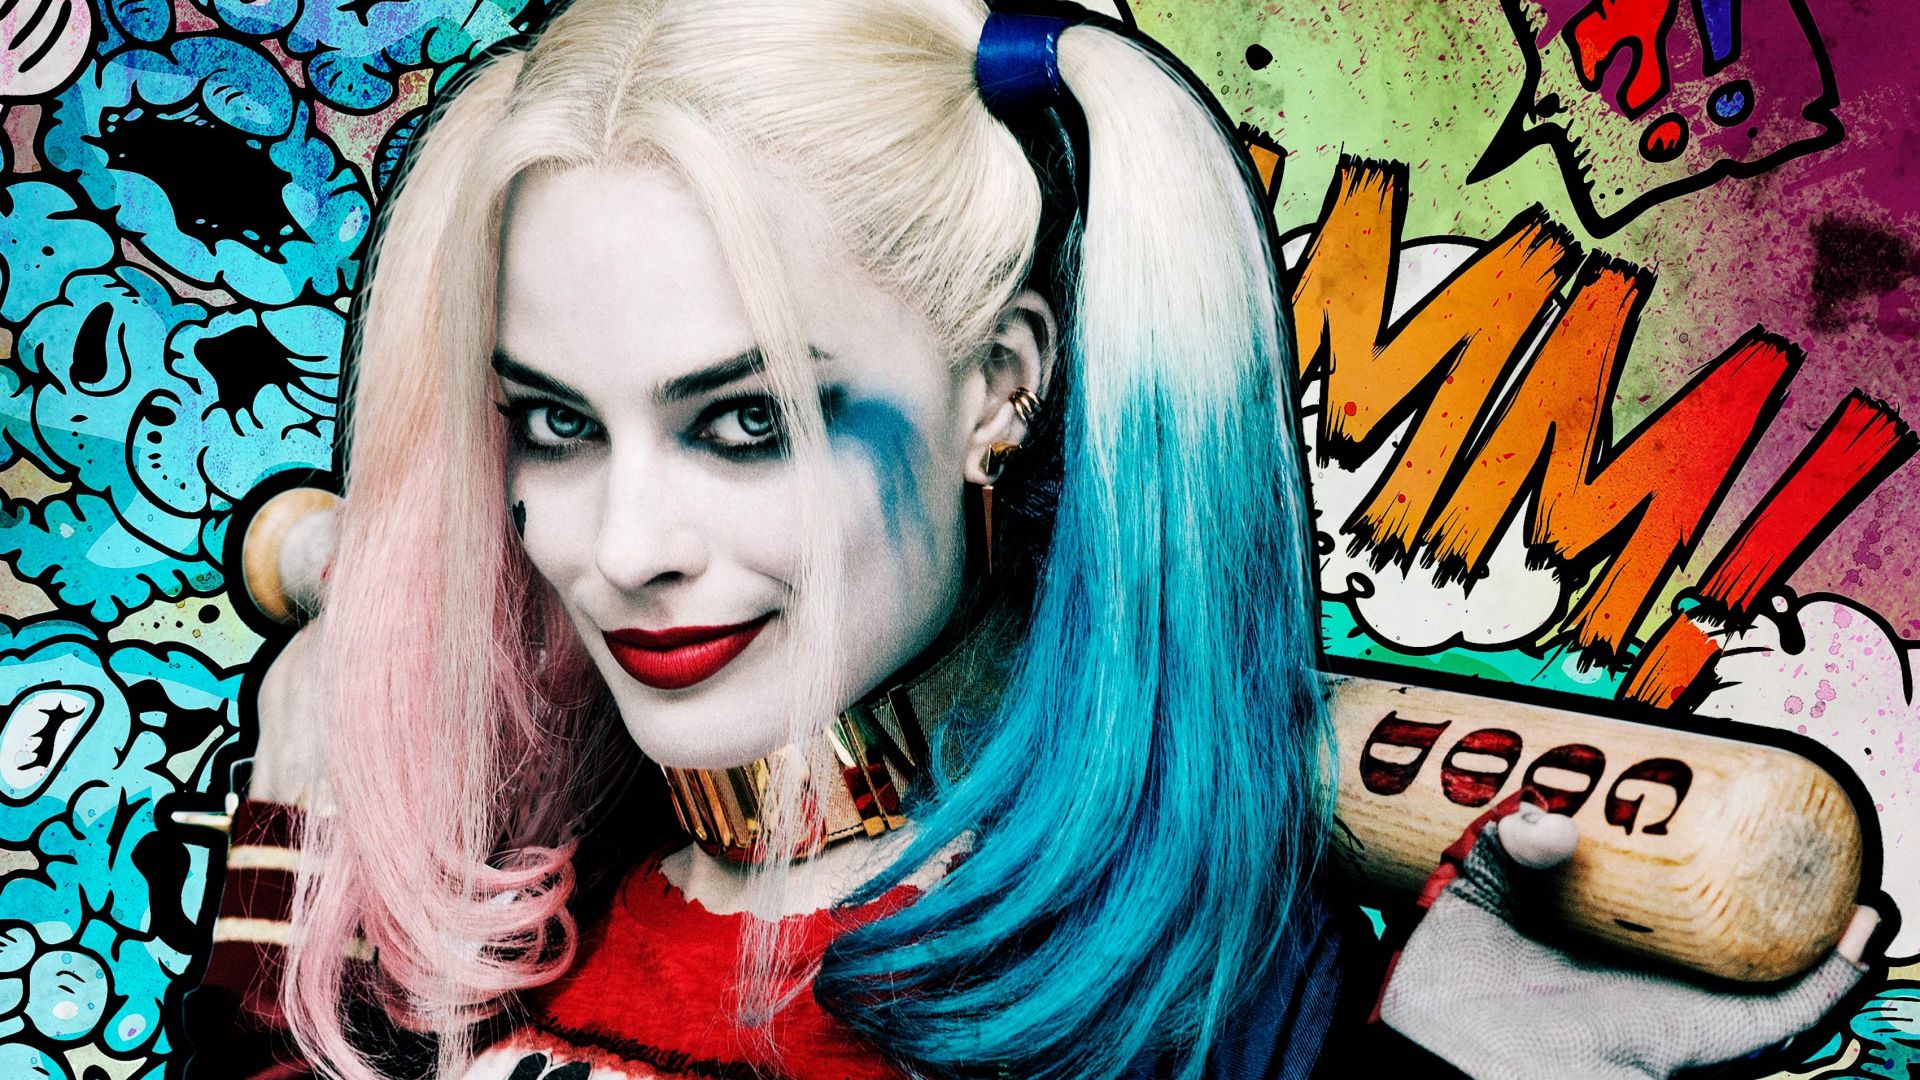 Harley quinn, Suicide Squad, Margot Robbie, Best Movies of 2016 (horizontal)